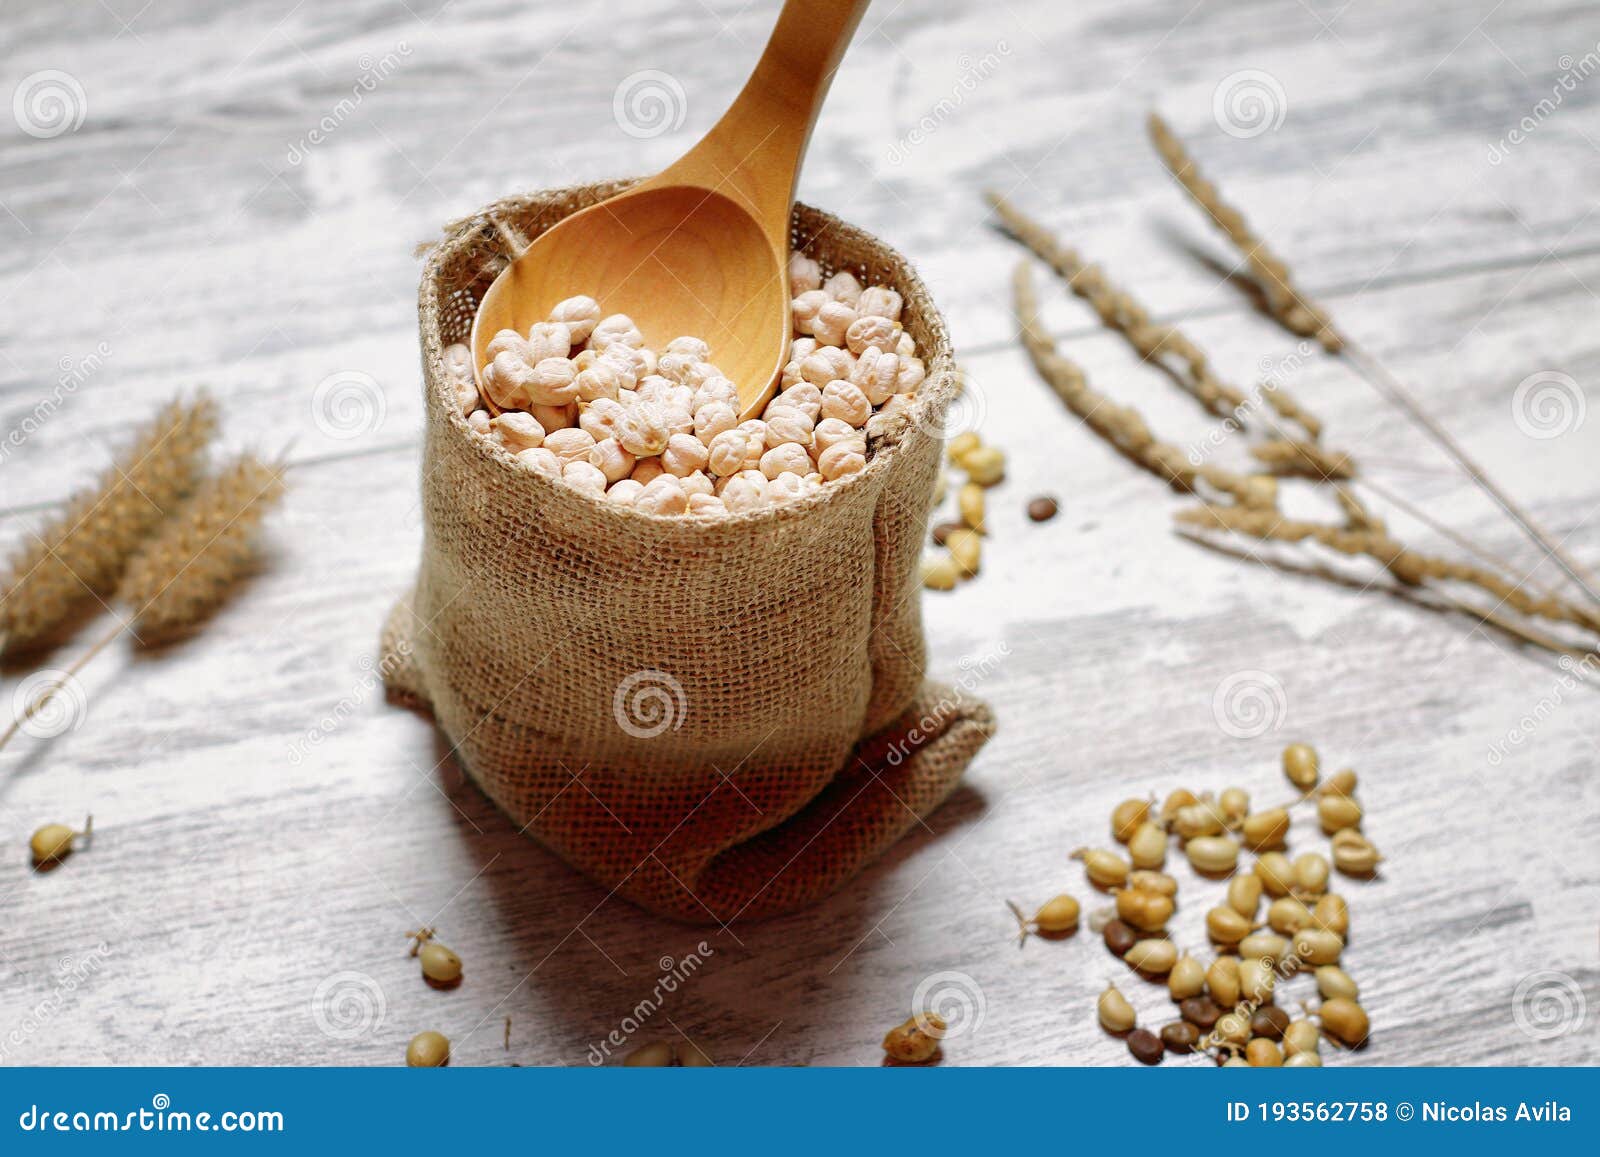 cloth bag with chickpeas and spoon ii